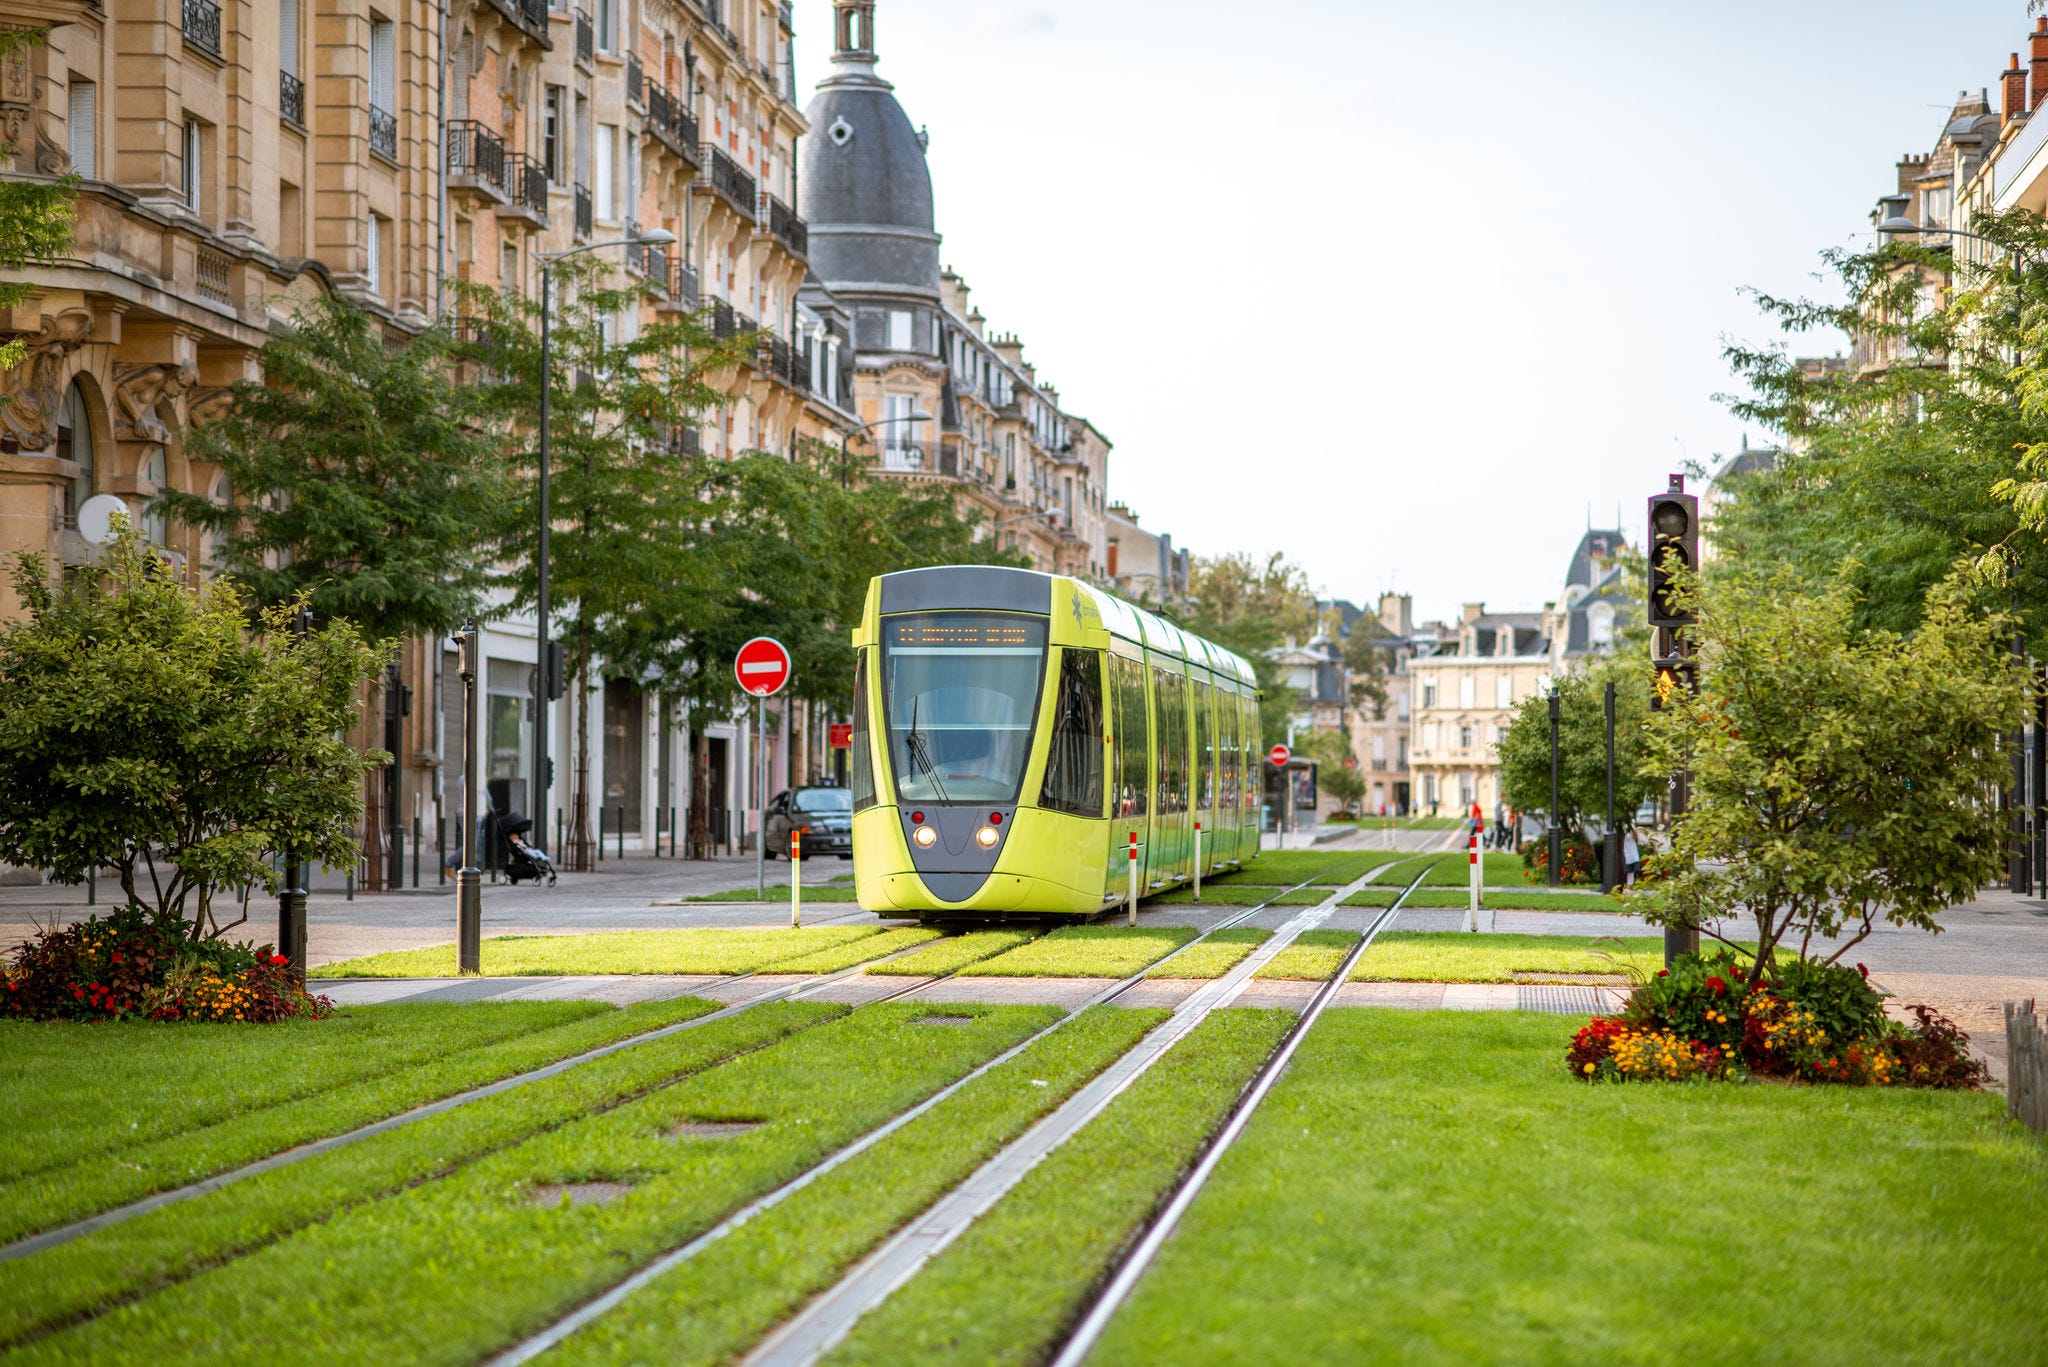 Street view with green railway of public transport in Reims city in Champagne-Ardenne region of France